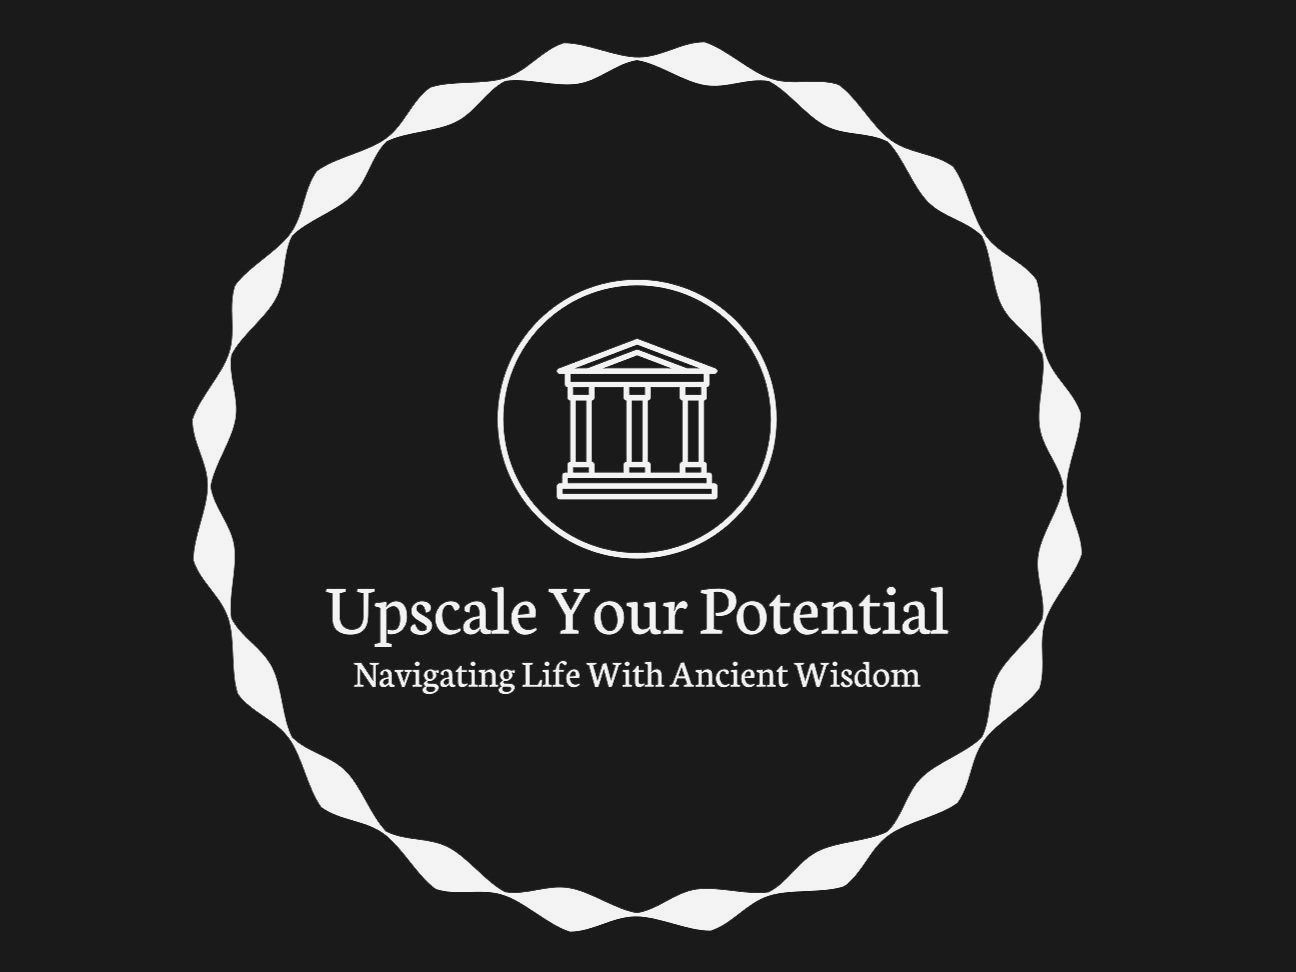 Upscale Your Potential